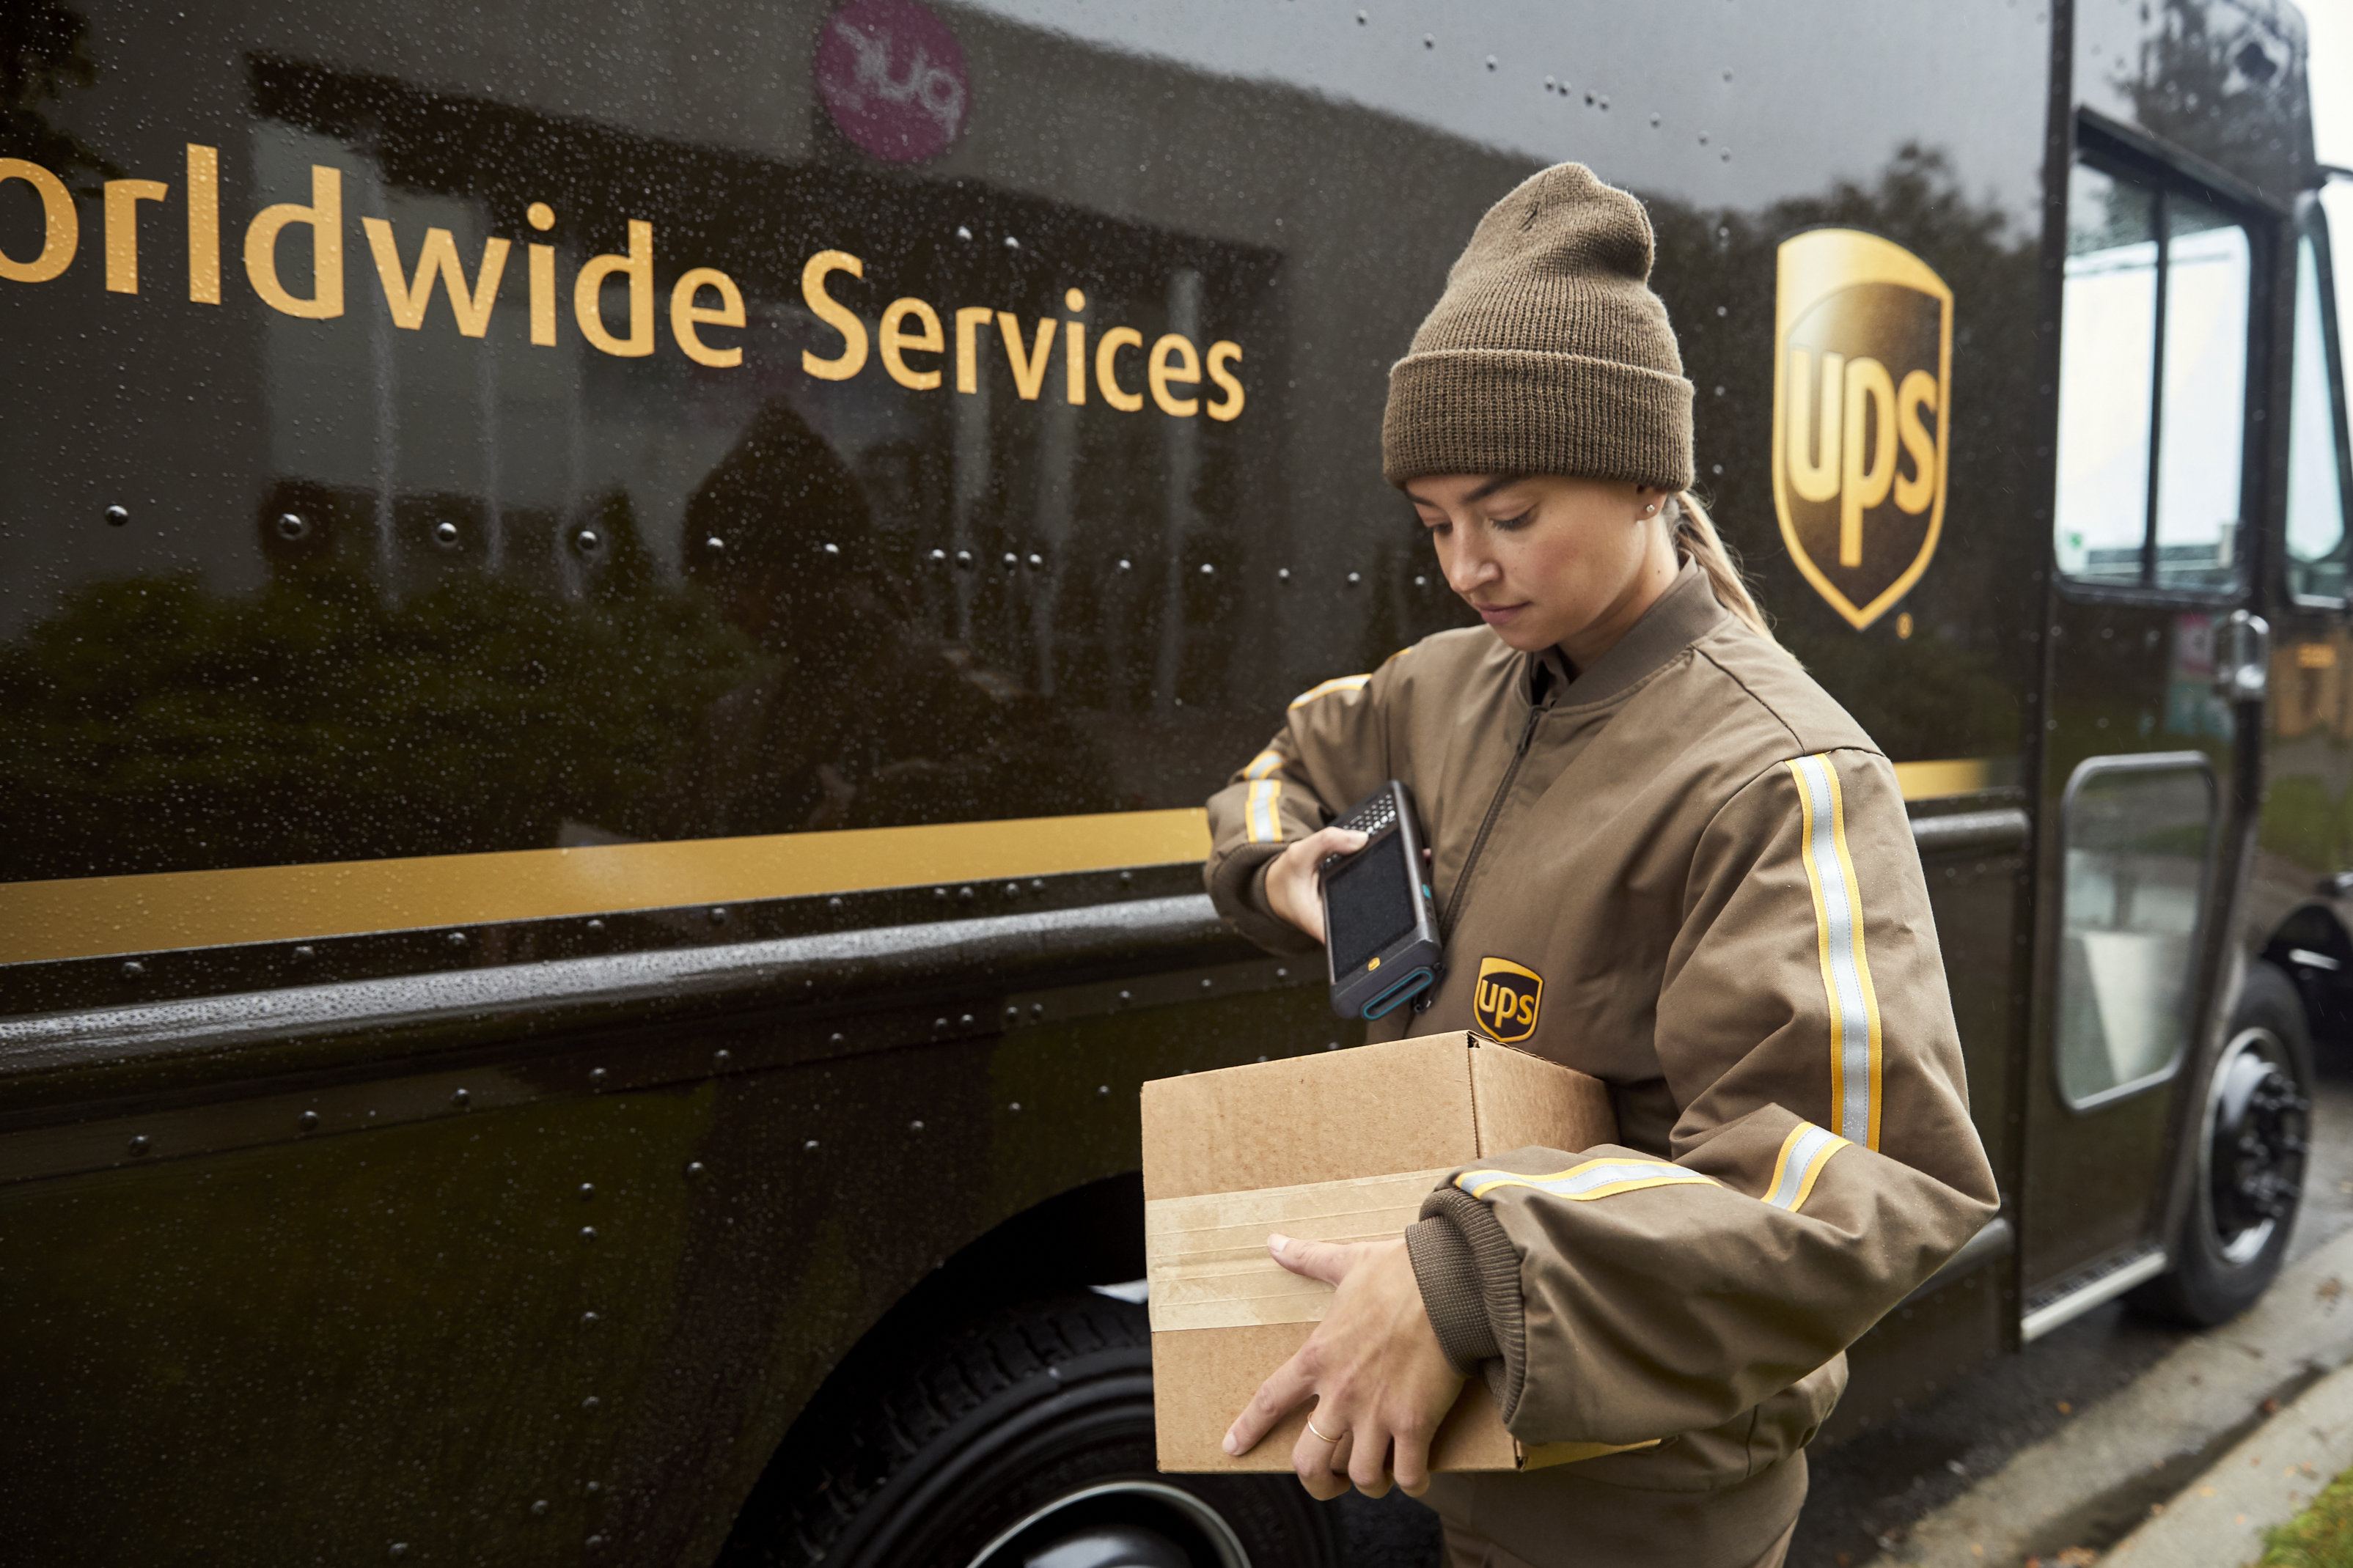 A woman scanning a package in front of a UPS truck